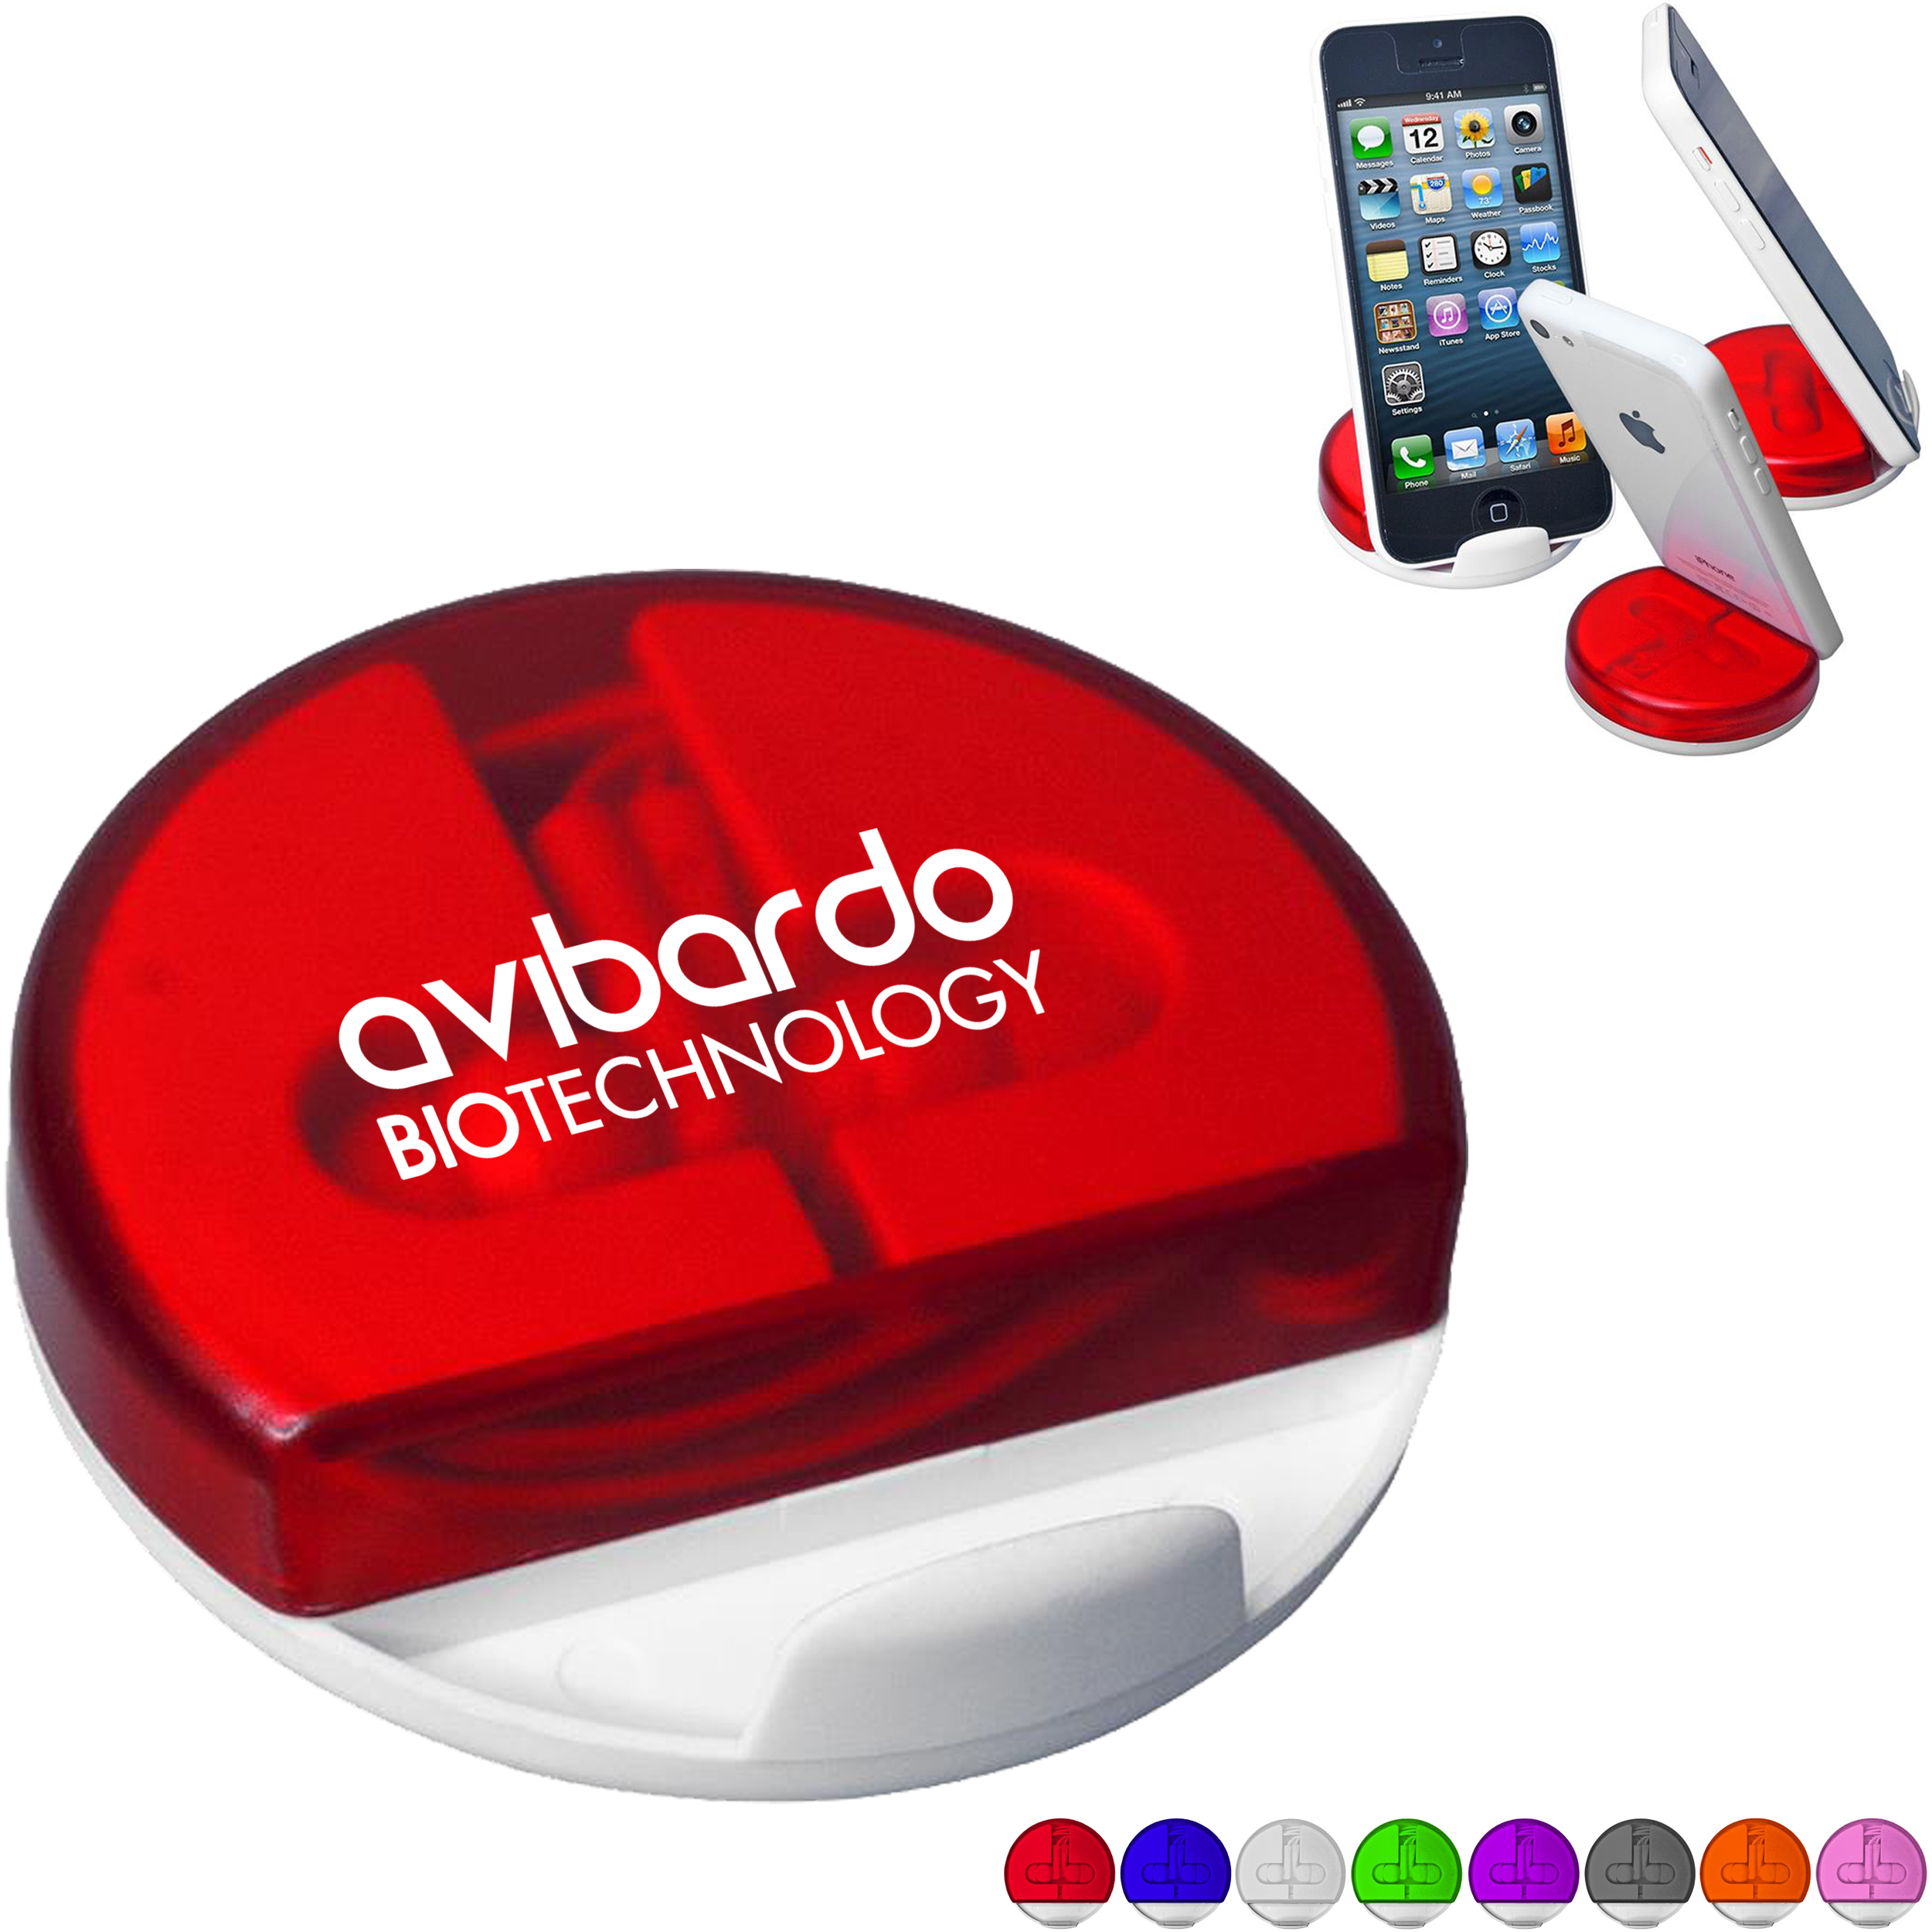 Smart Phone Stands by Promotional Products for Health & Wellness